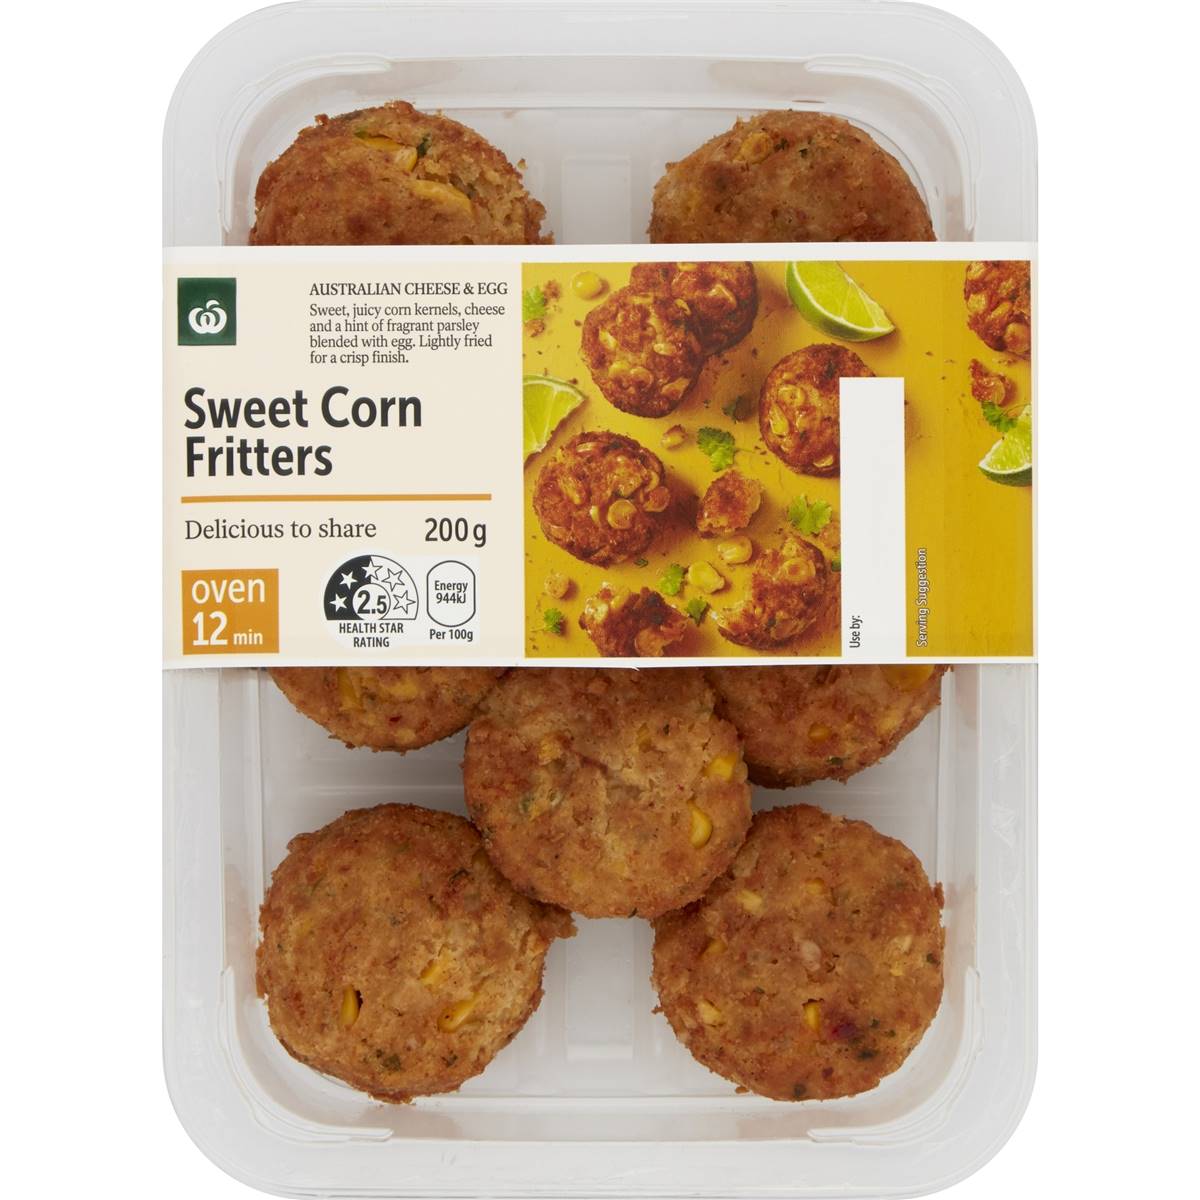 Calories in Woolworths Sweet Corn Fritters